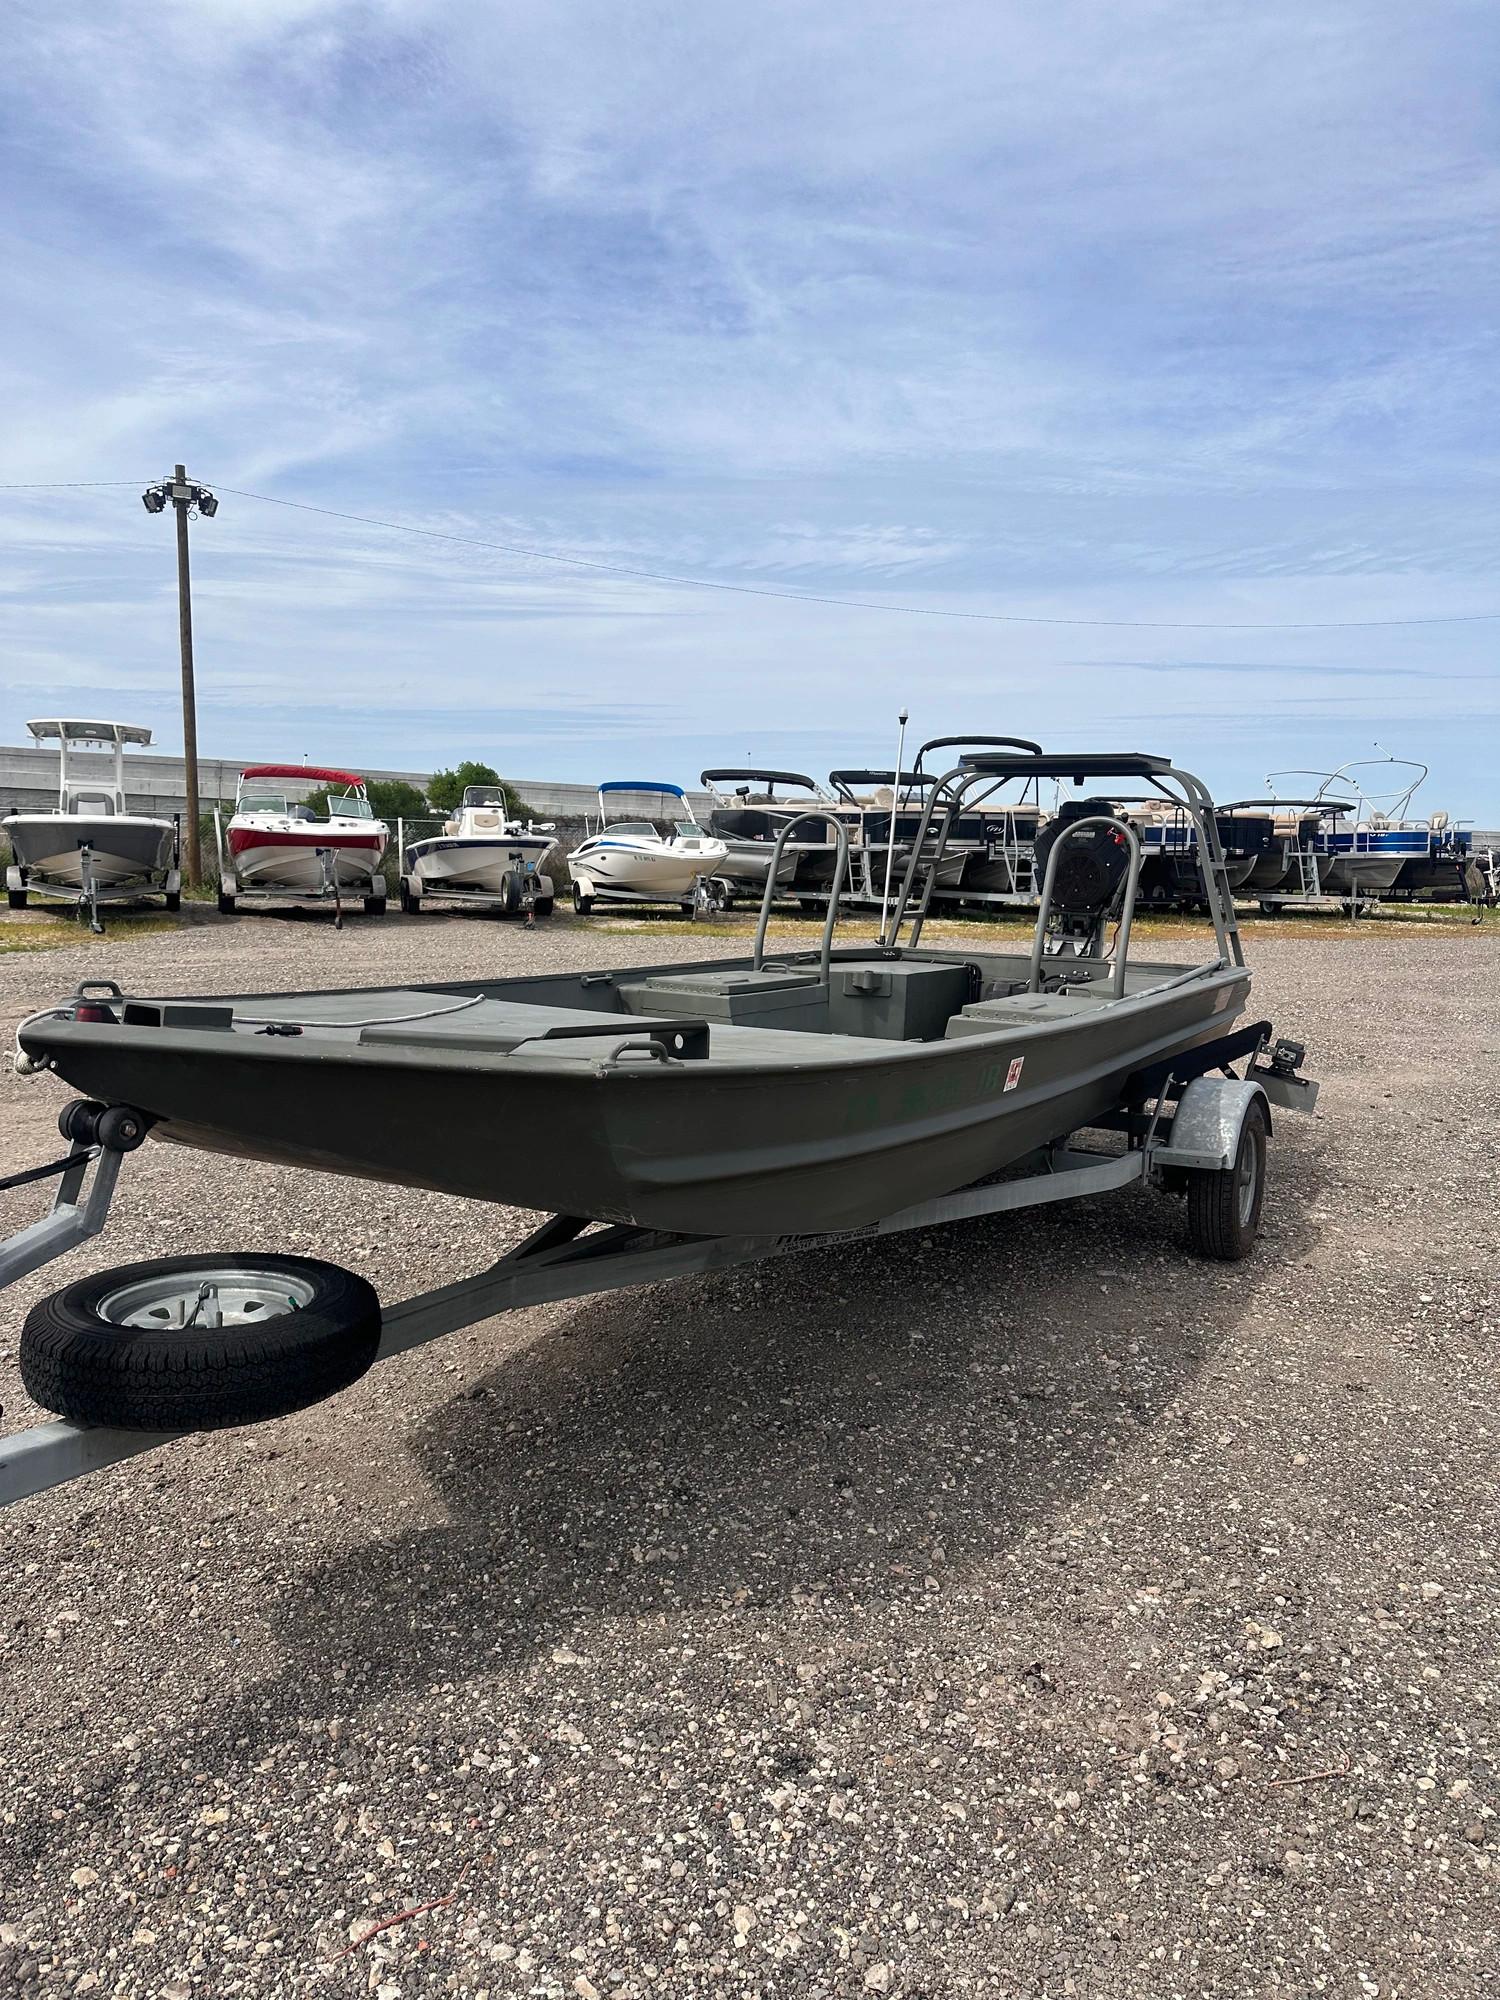 Go-Devil boats for sale - boats.com